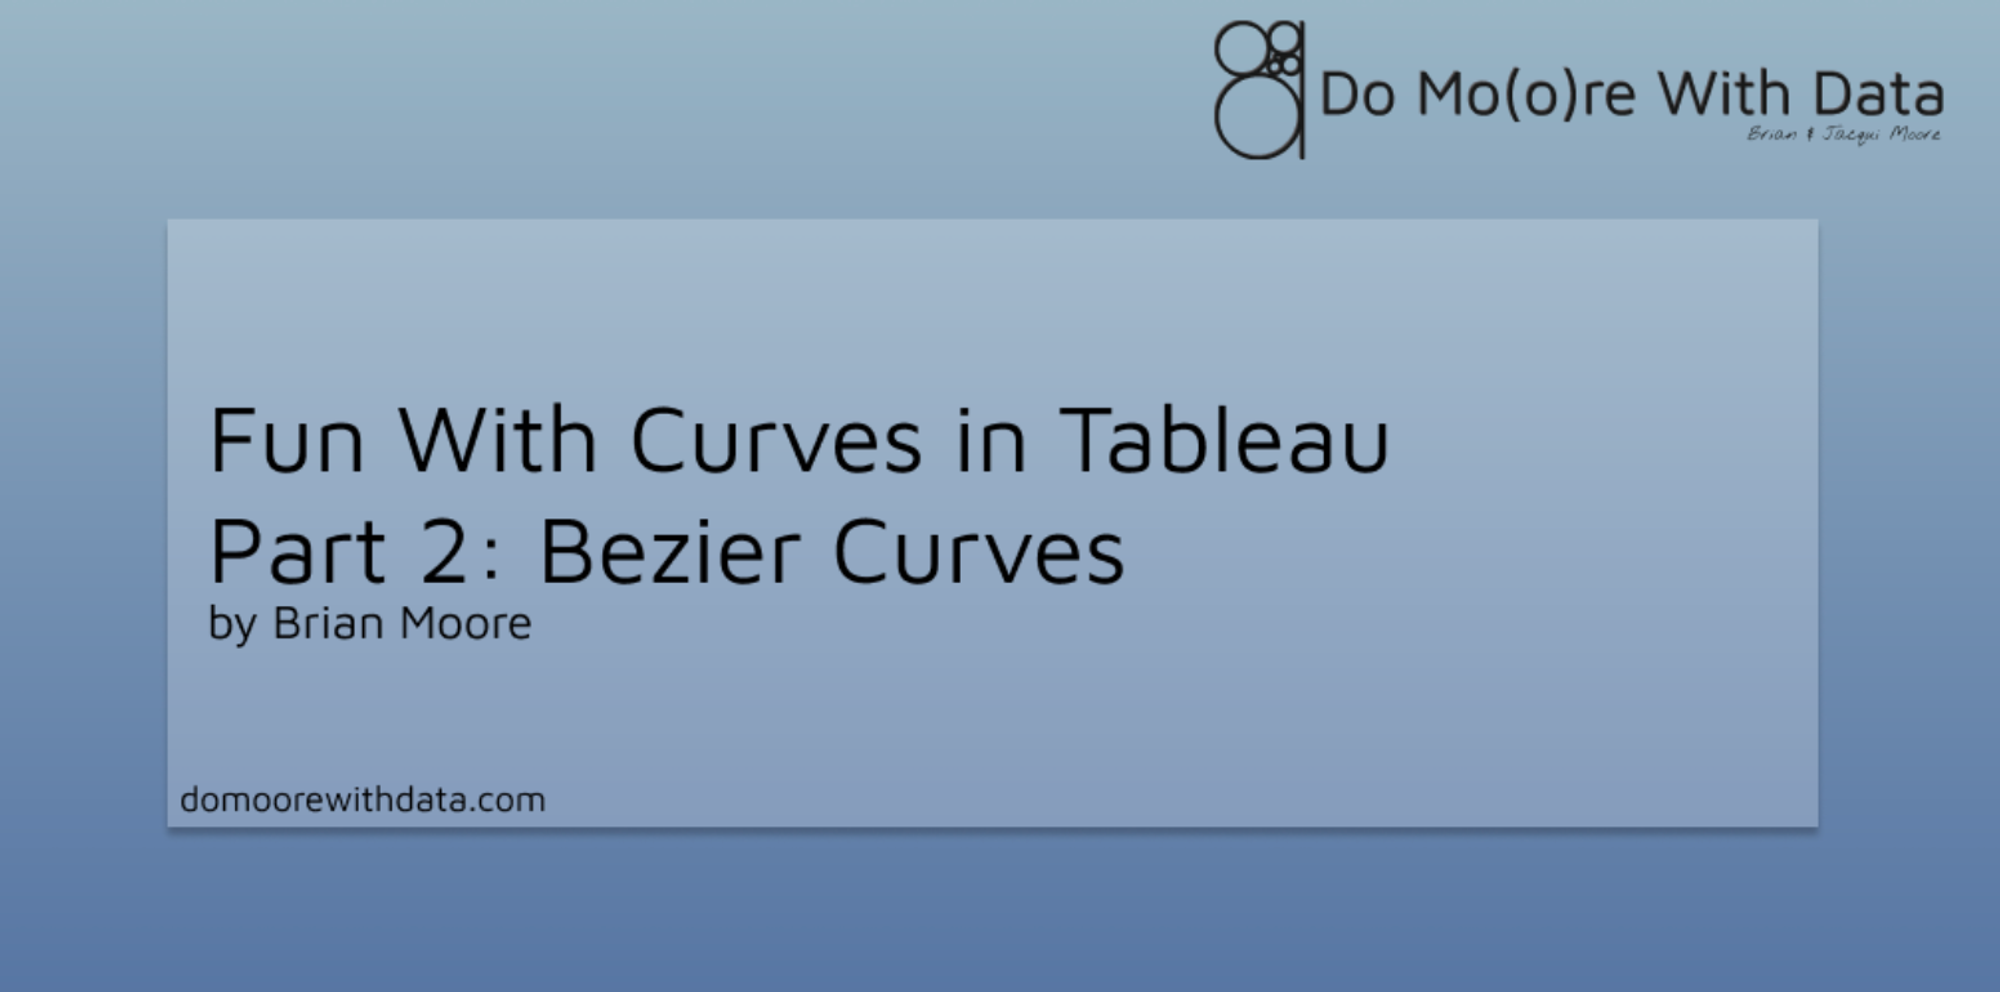 Fun With Curves in Tableau Part 2: Bezier Curves